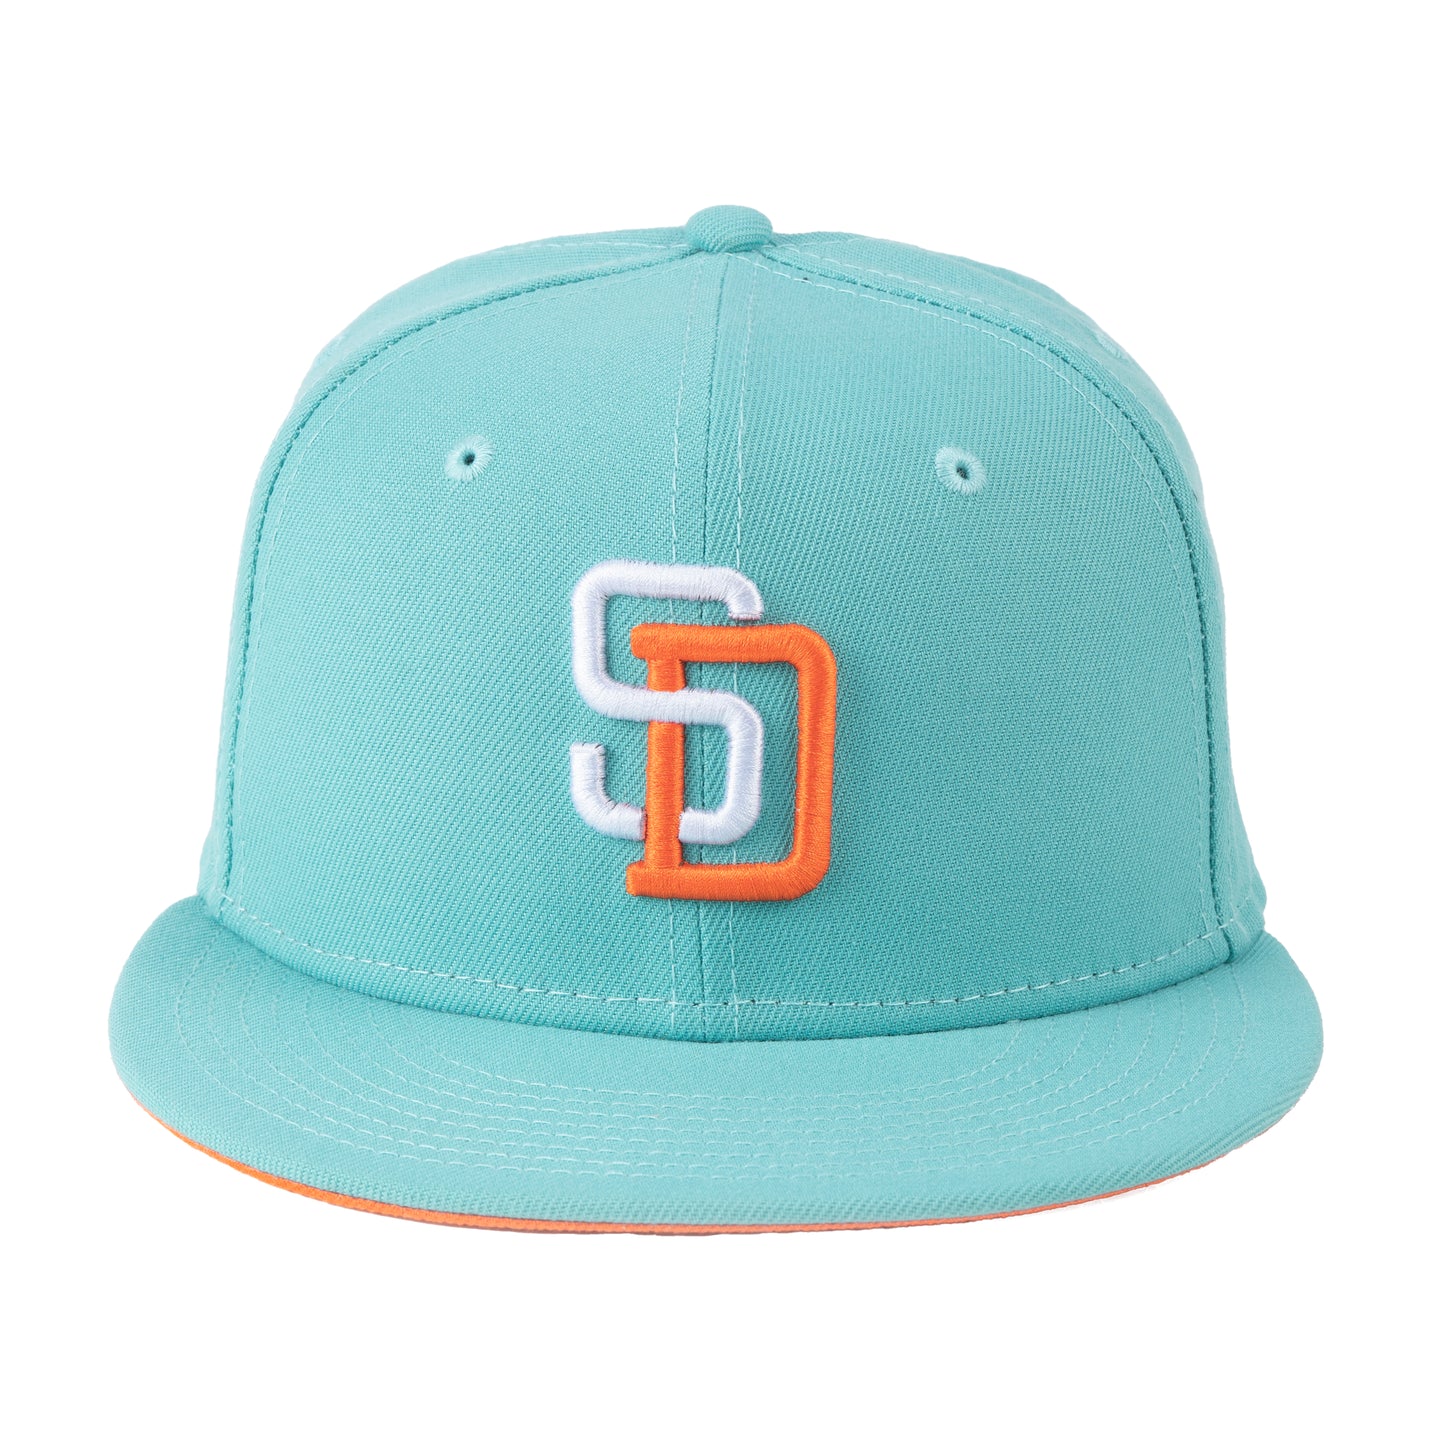 SAN DIEGO PADRES "JUNIPER BERRY PACK" NEW ERA 59FIFTY HAT